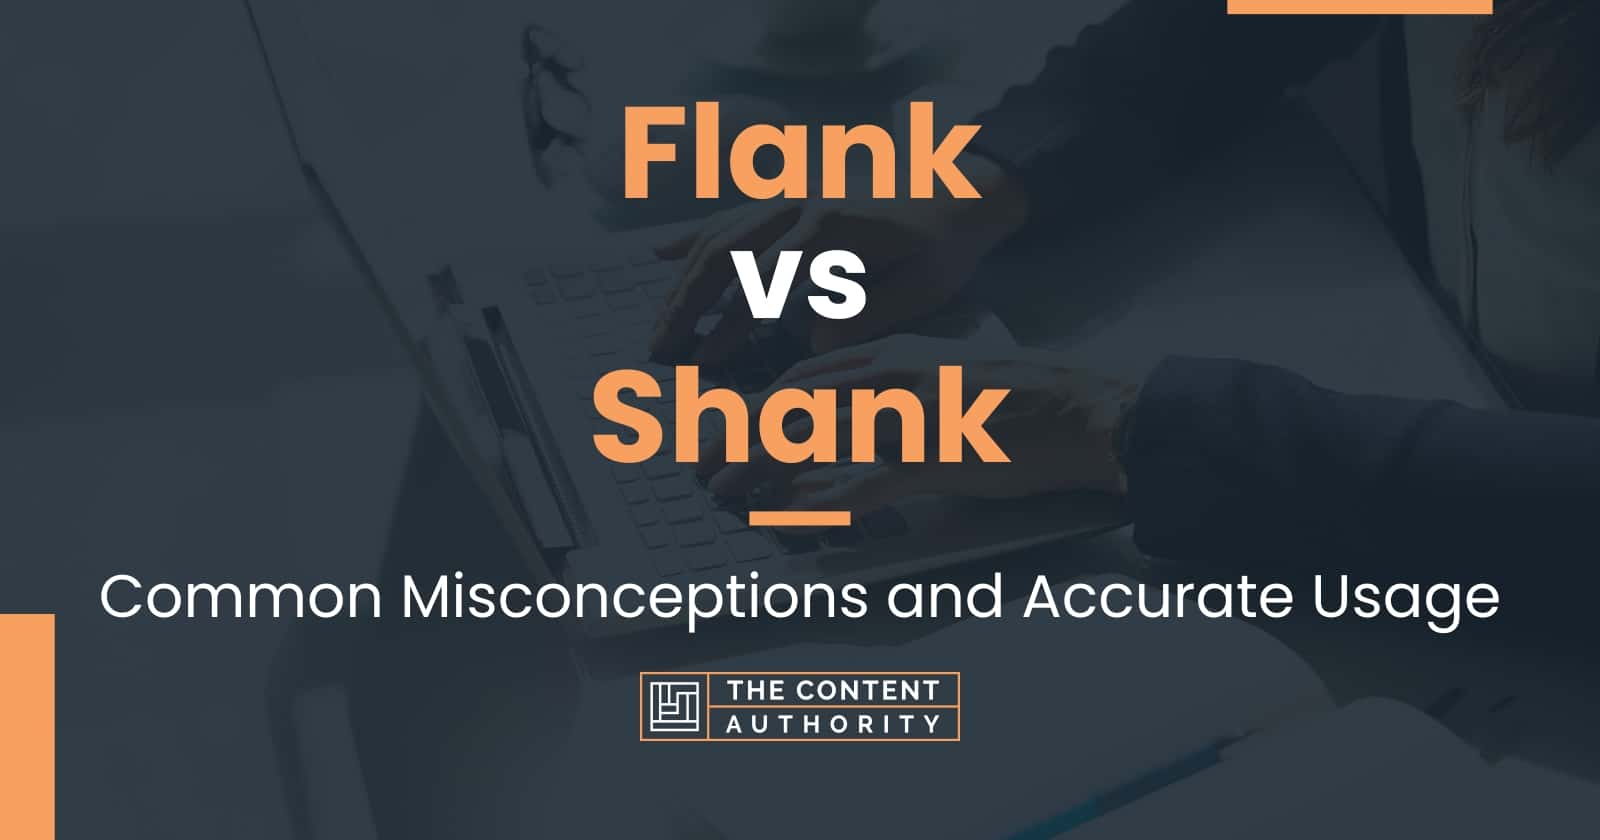 Define Flank, Flank Meaning, Flank Examples, Flank Synonyms, Flank Images,  Flank Vernacular, Flank Usage, Flank Rootwords